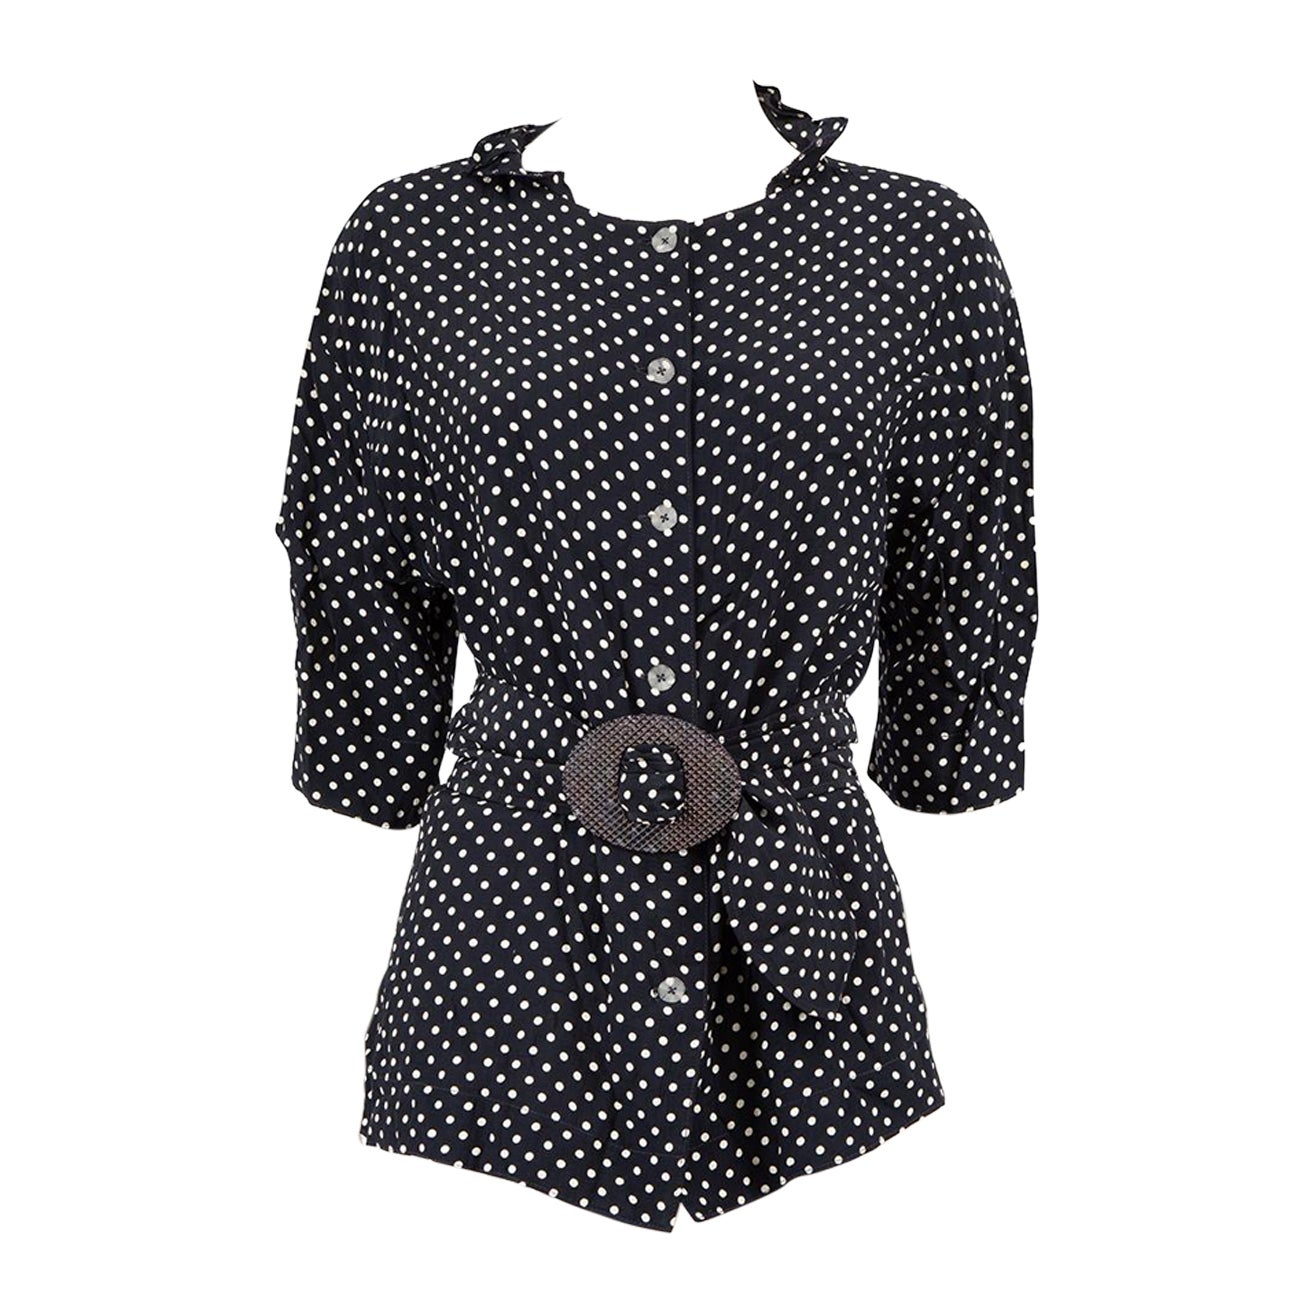 Jean Muir Navy Polka Dot With Bow Shirt Size M